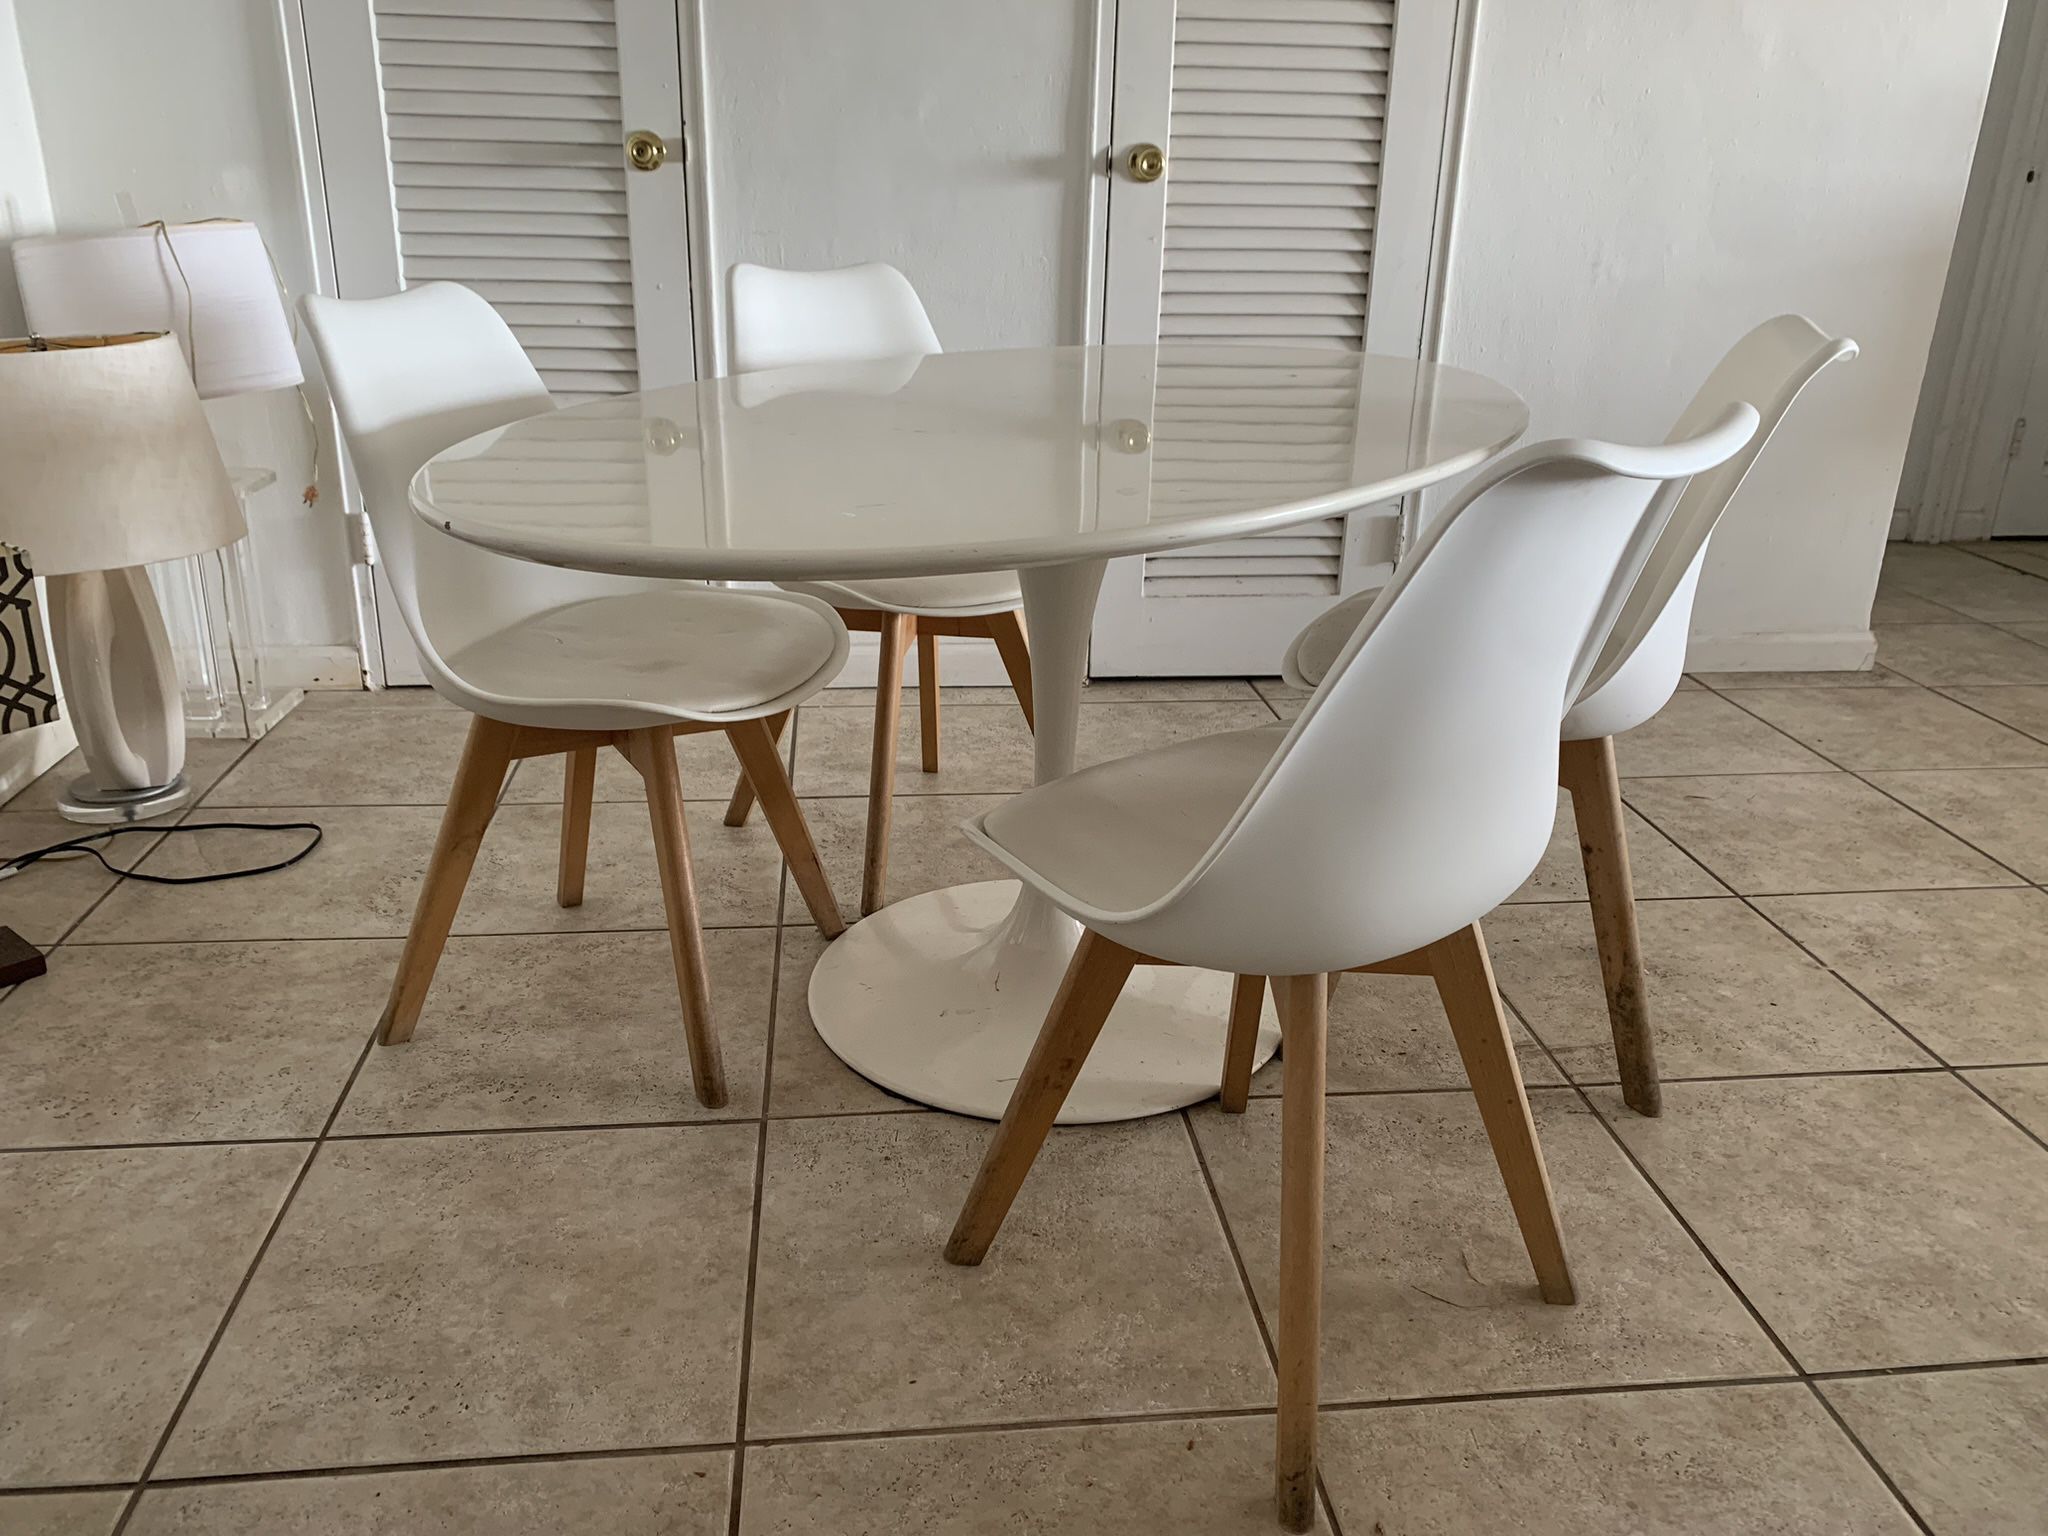 Table + Chairs